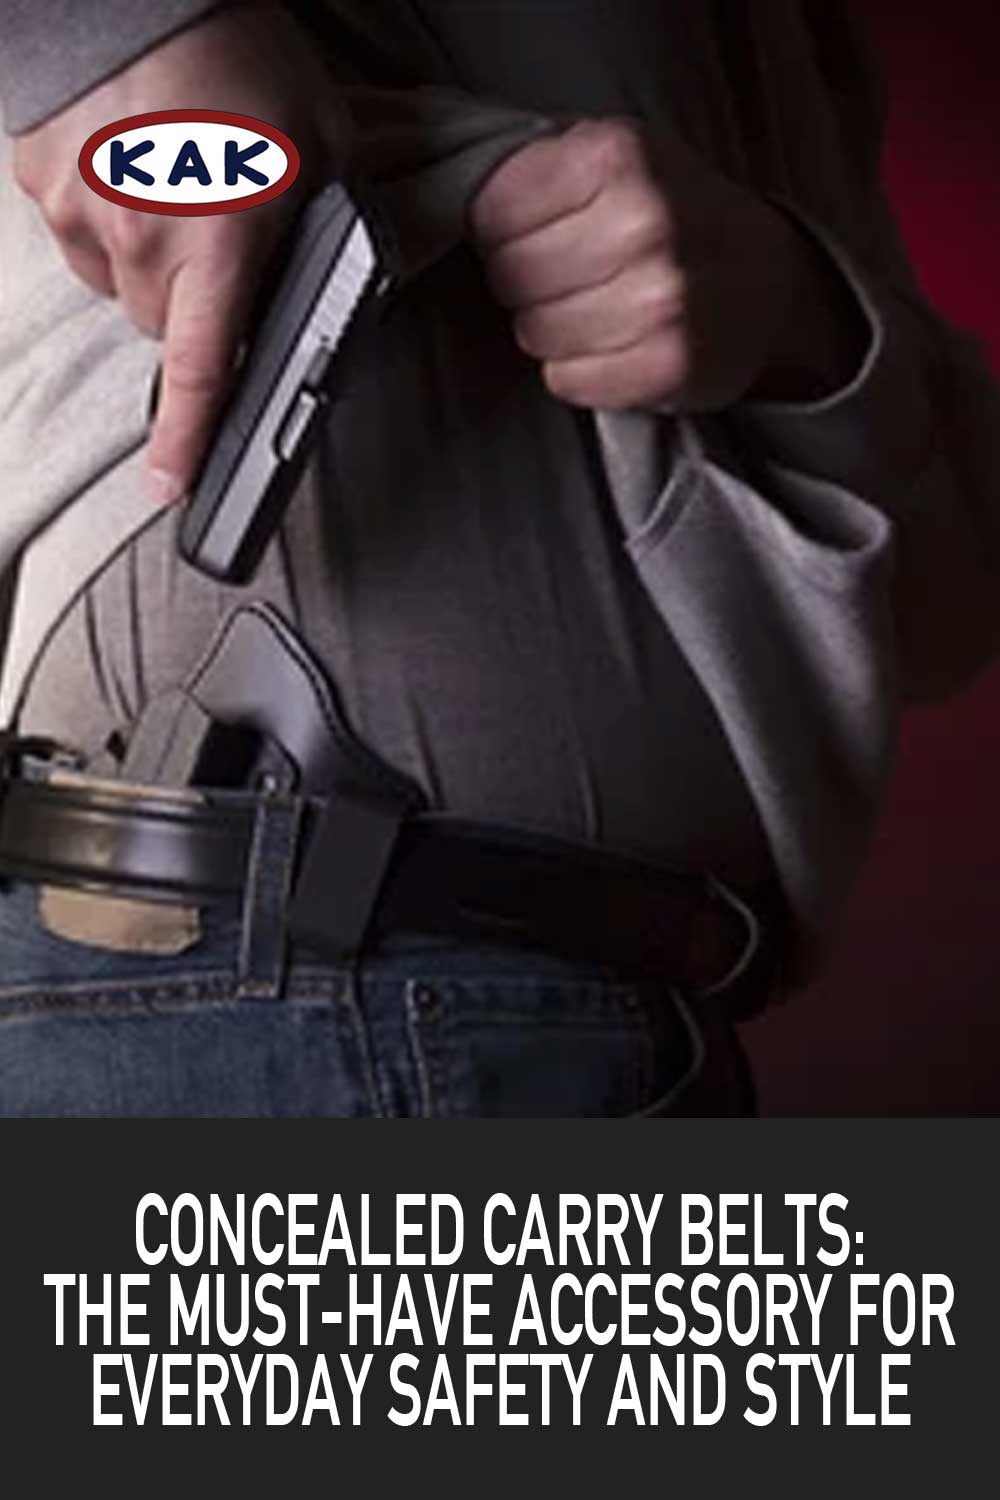 Concealed Carry Belts: The Must-Have Accessory for Everyday Safety and Style